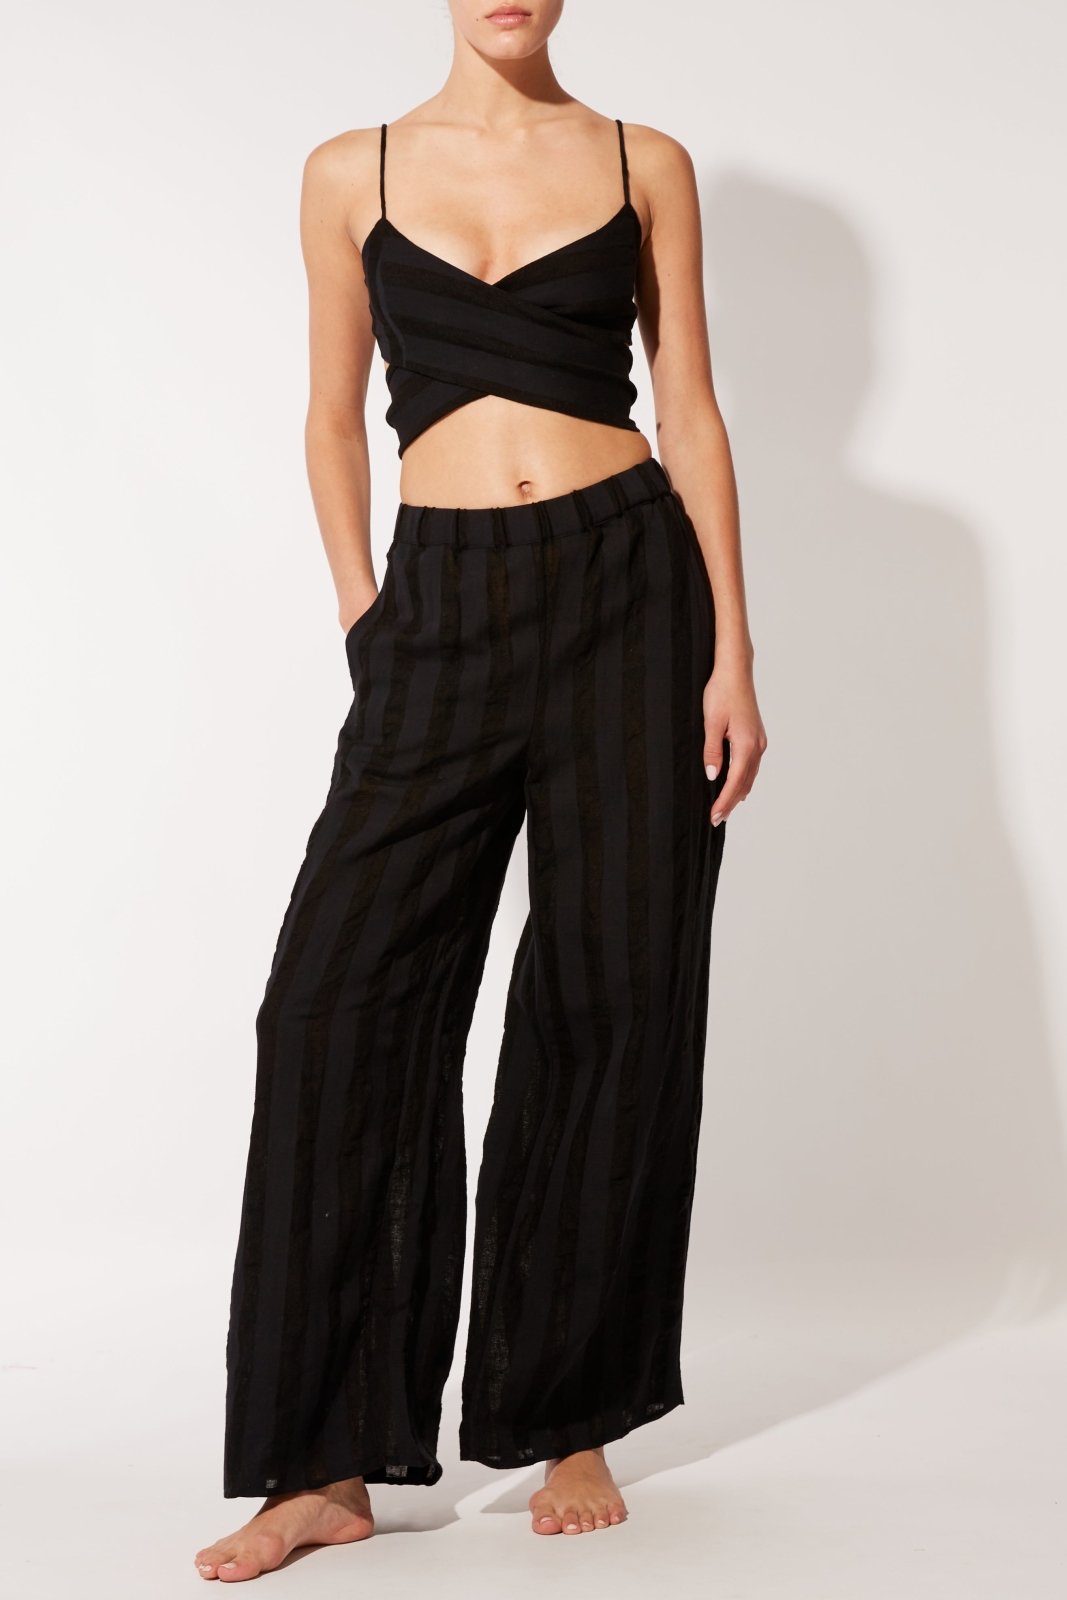 The Delaney Pant in Blackout